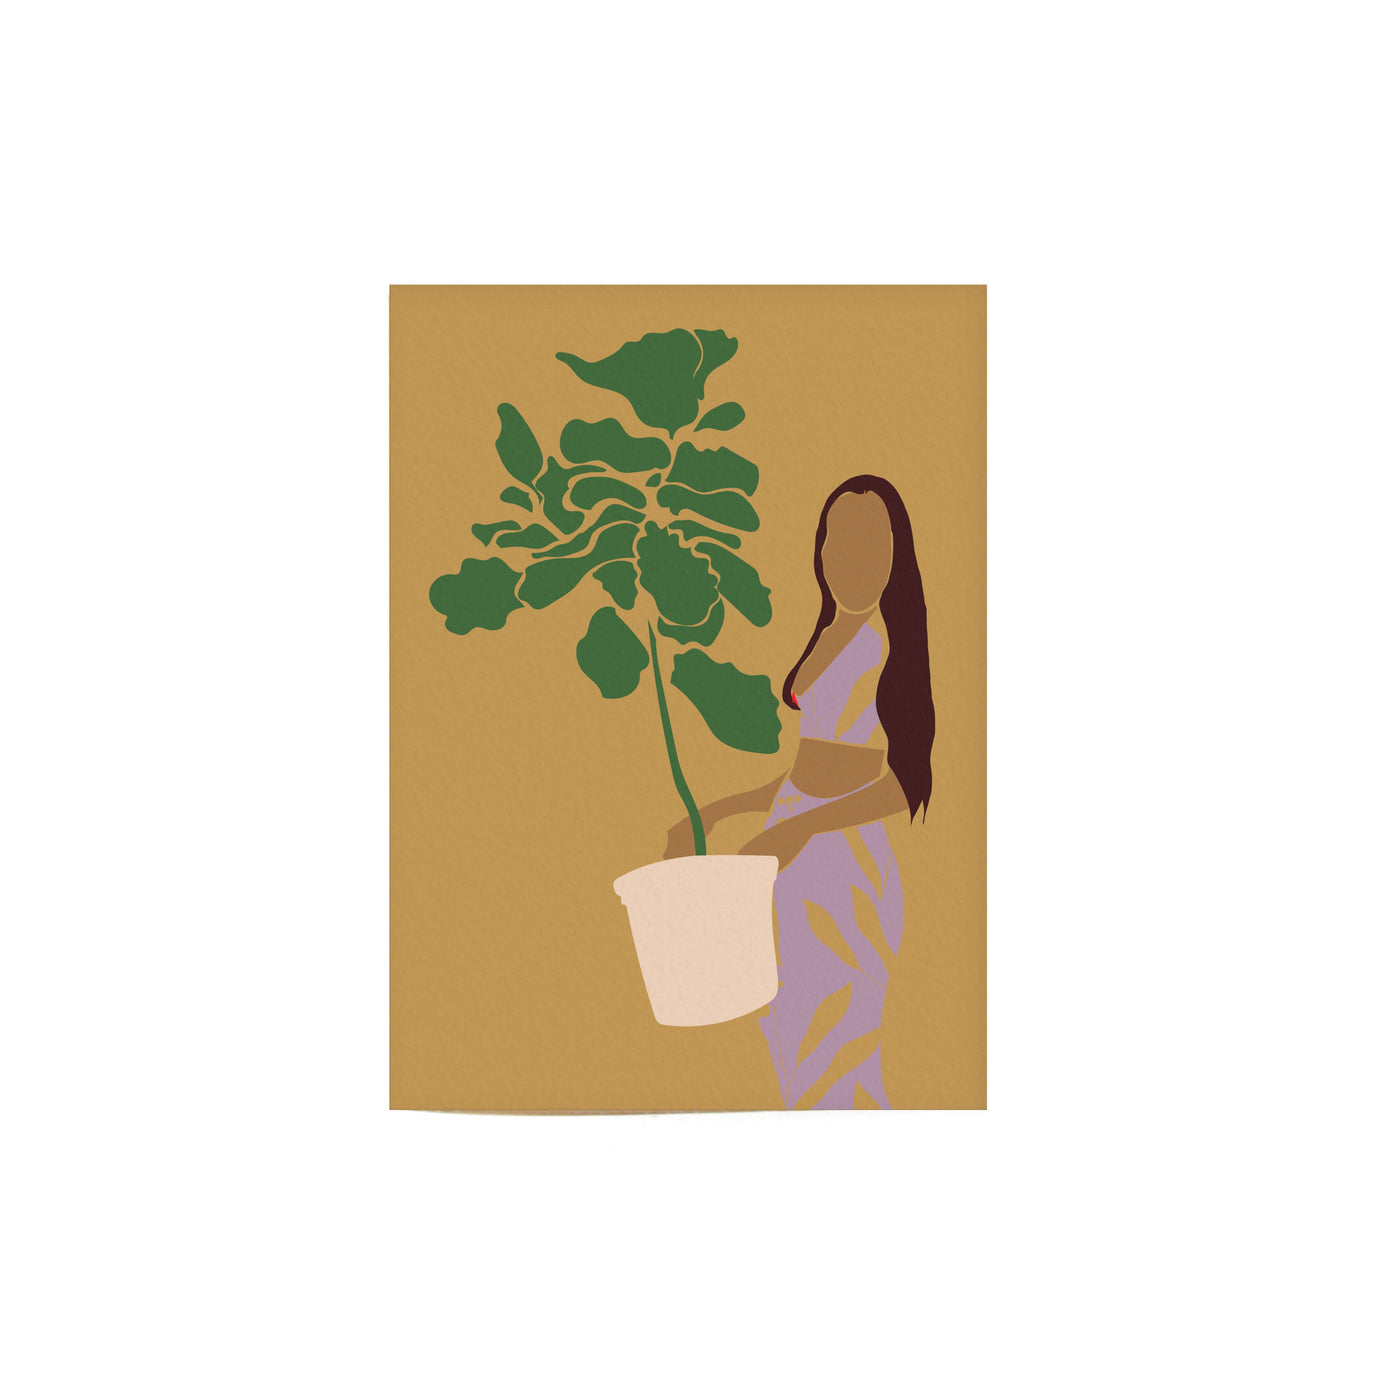 "Plant mom card" that shows a woman holding a plant